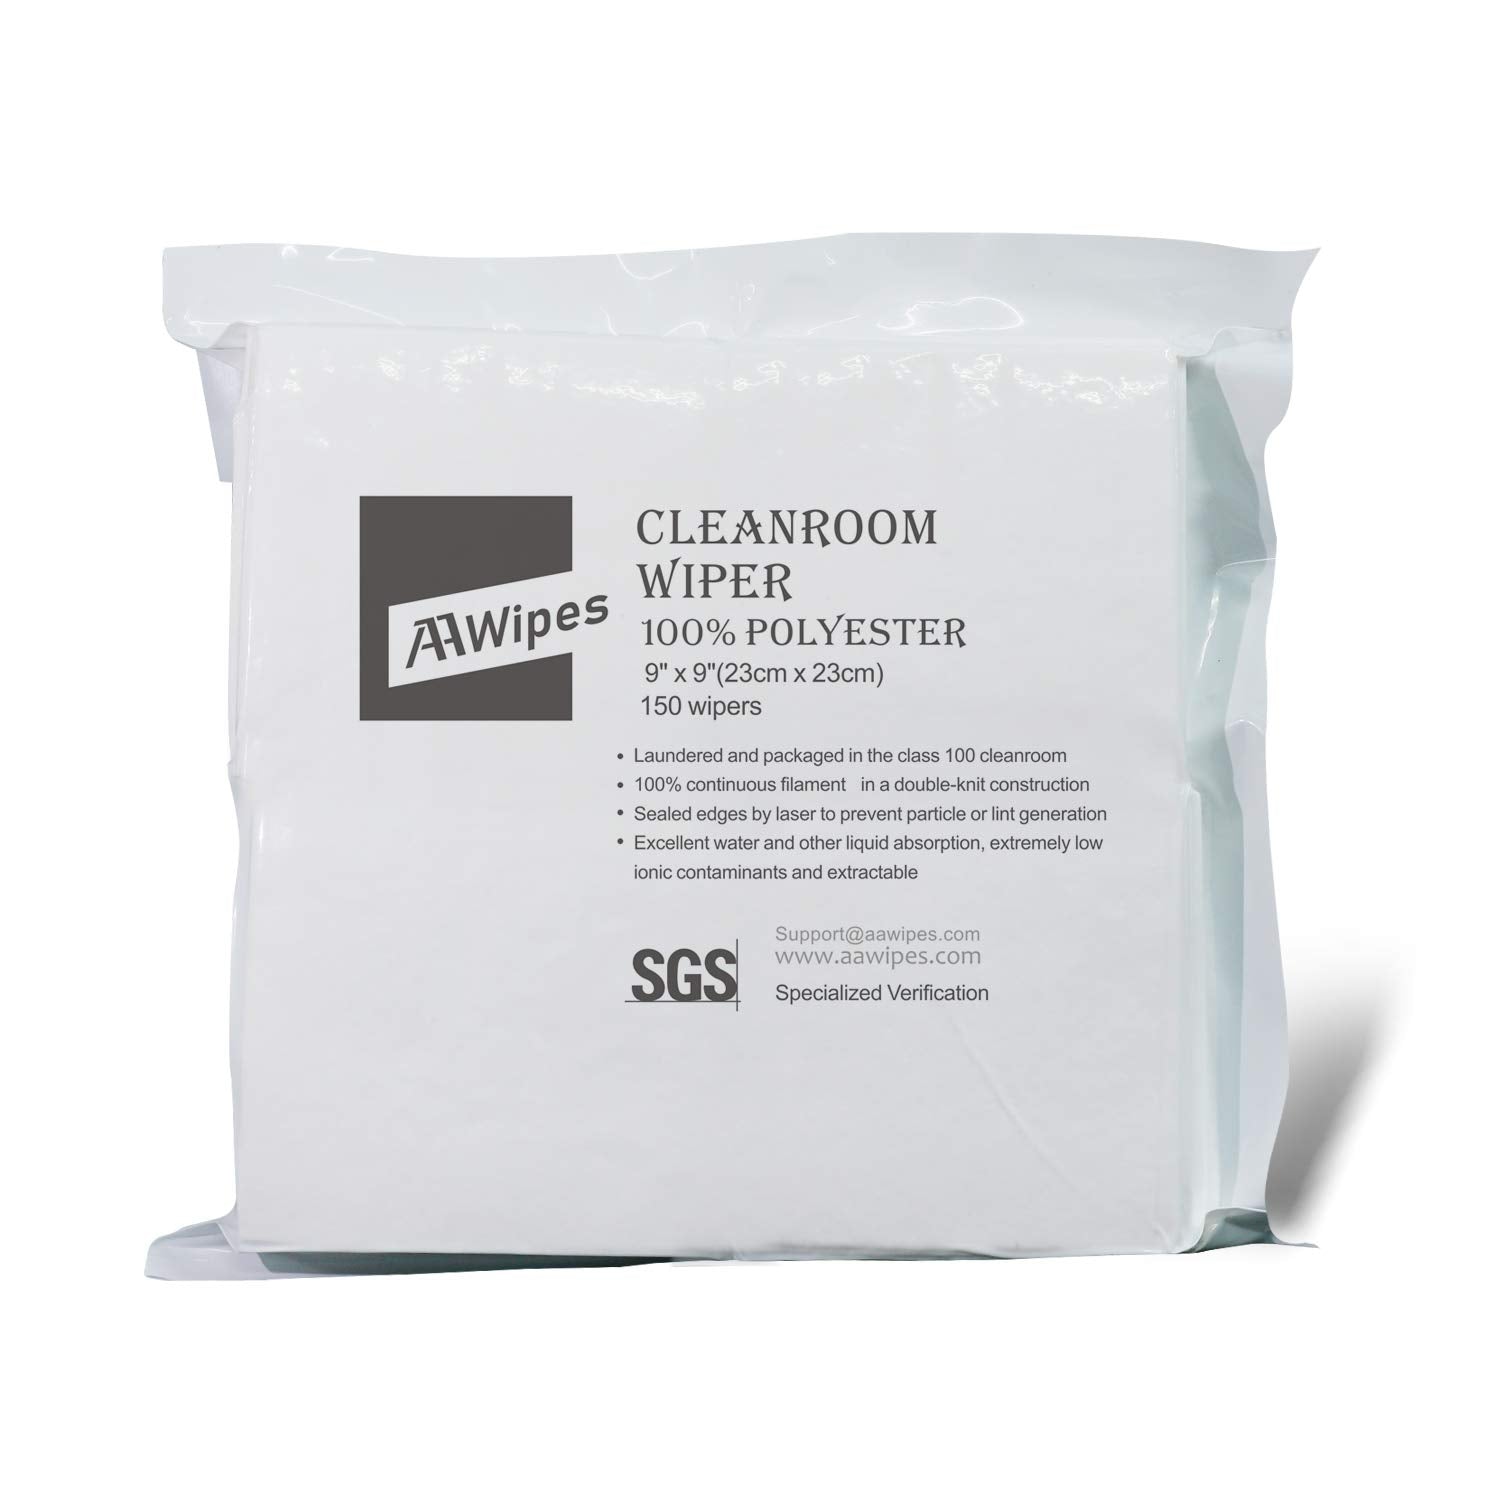 Aerospace Aviation Cleanroom Wipers 9"x9" Double Knit 100% Polyester Wipes Lint Free Cloths with Ultra-fine Filaments, Laser Sealed Edge, ISO 4-5, Class 10-100 Cloths, Ultra-Soft Wipes(No. CP14009-140 Bags/10 Boxes for Mac)